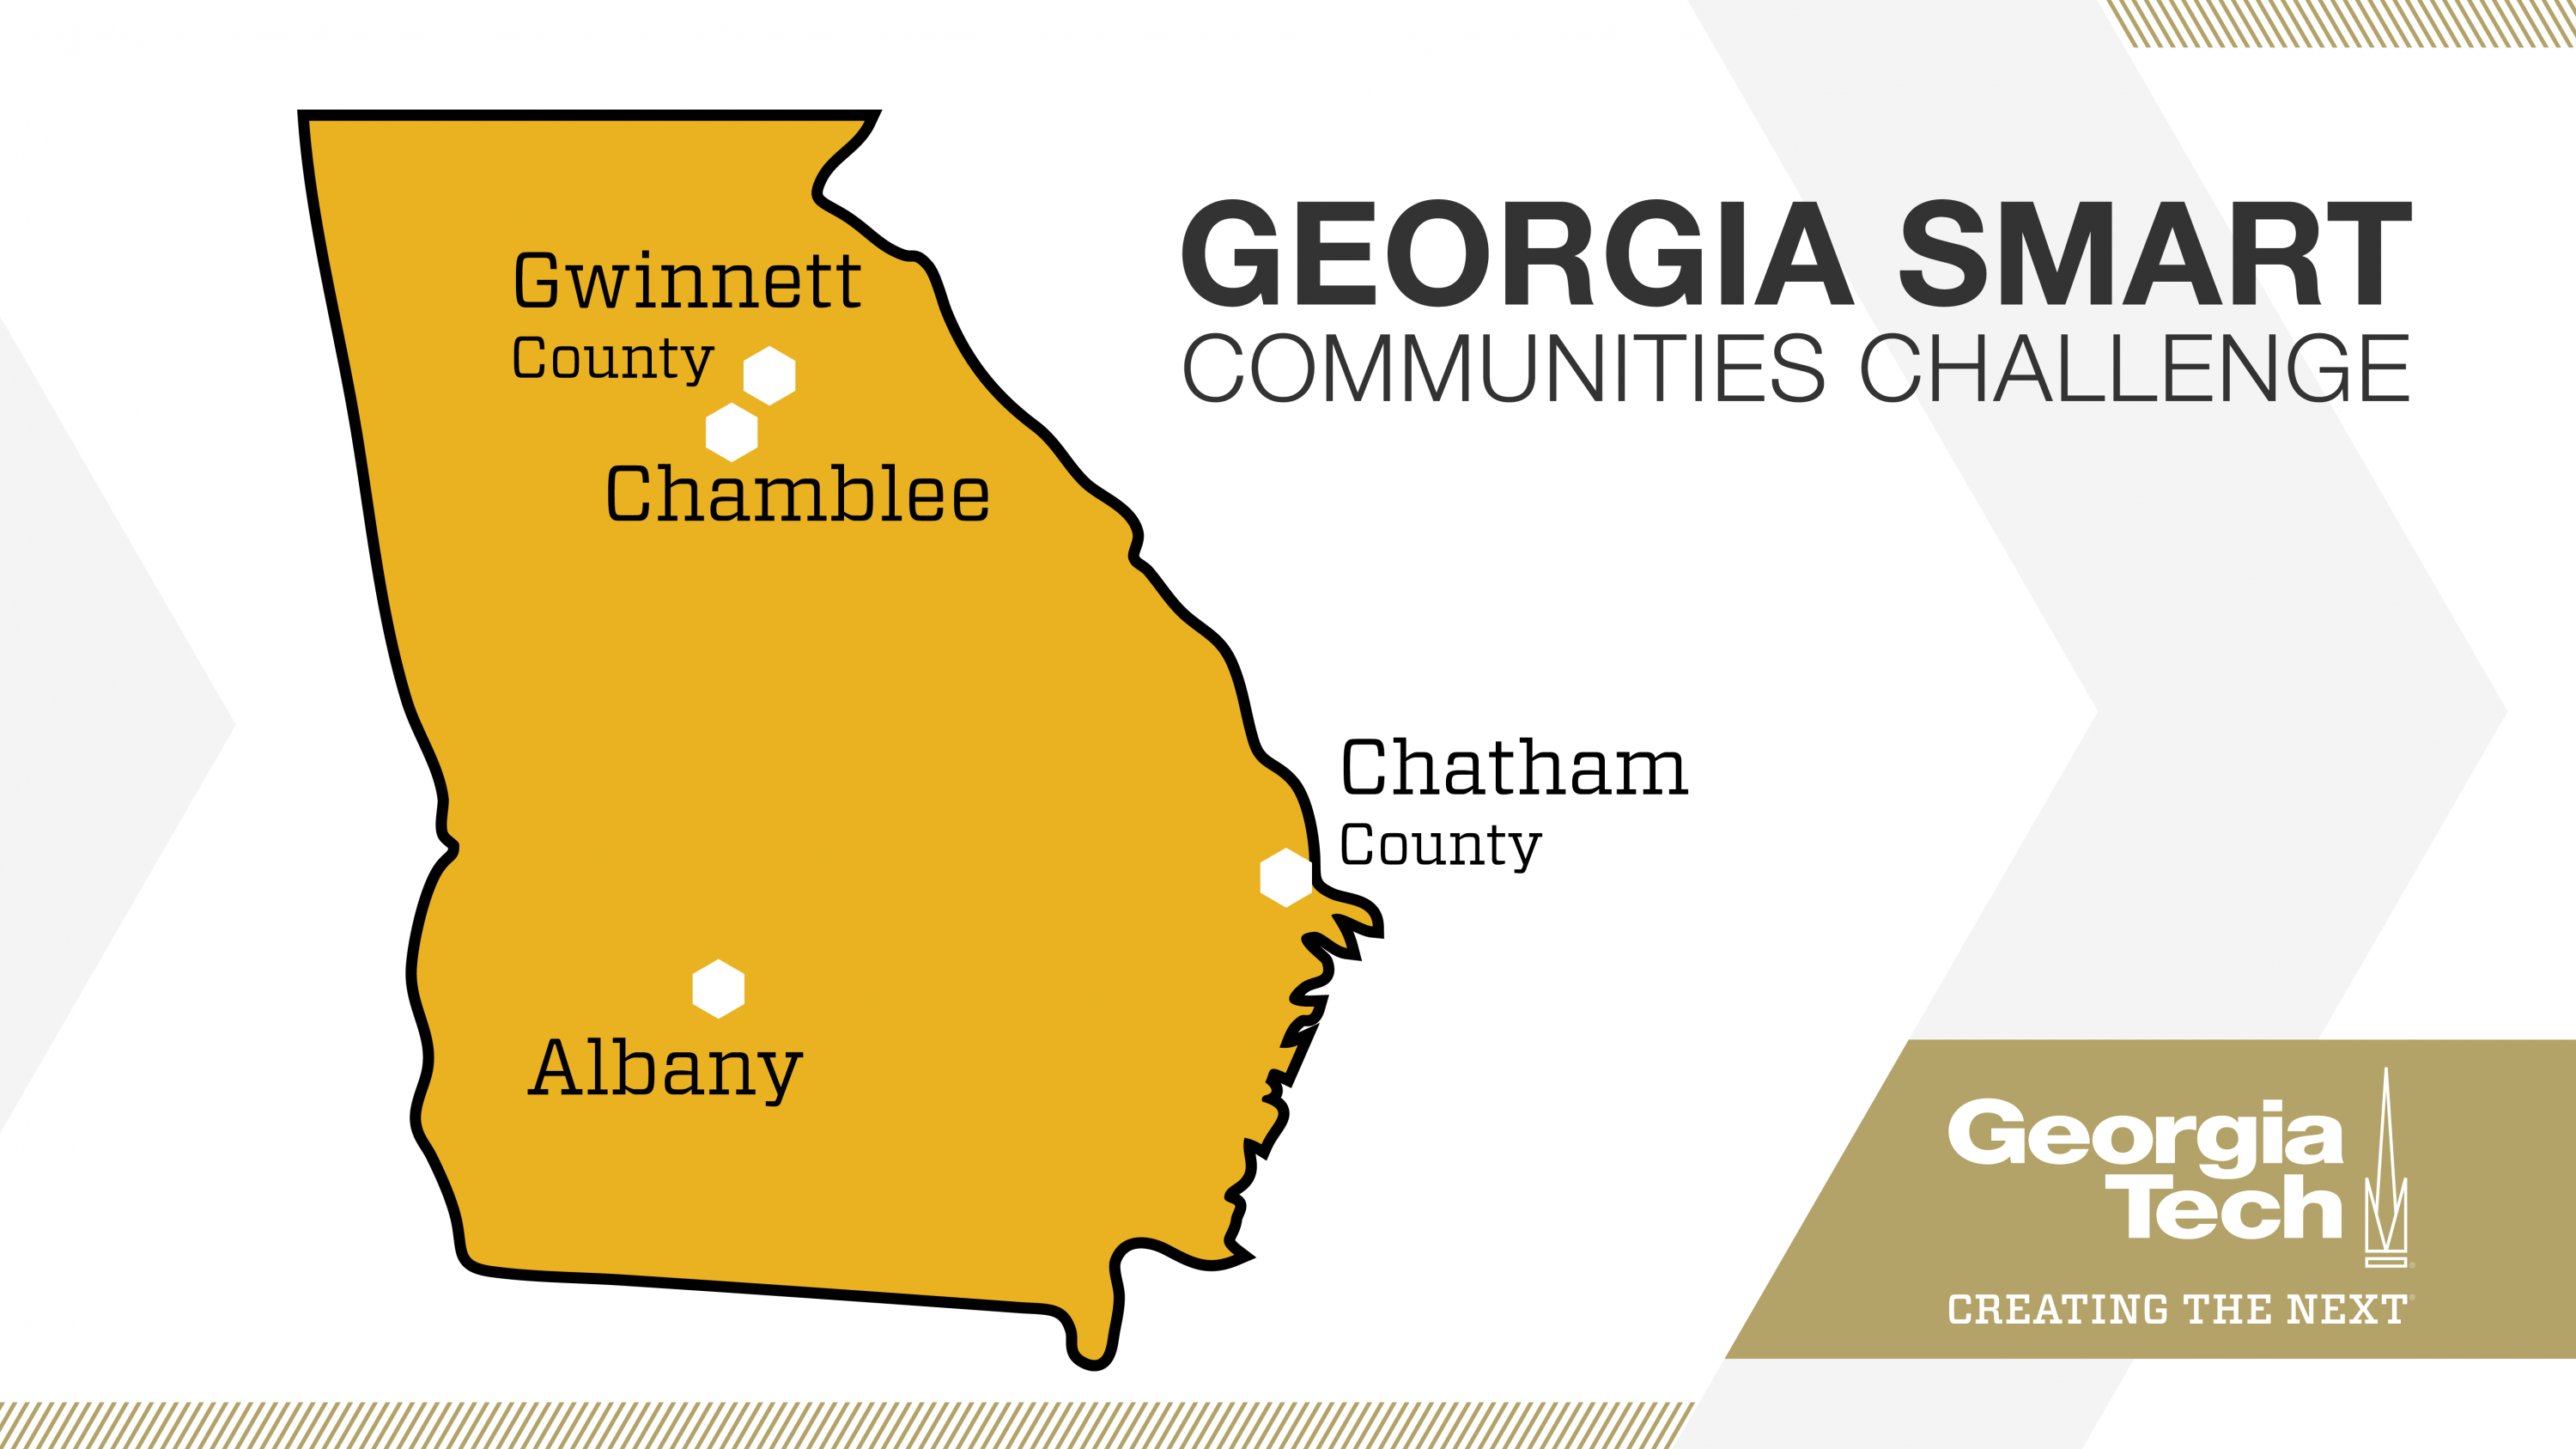 Albany, Chamblee, Chatham County and Gwinnett County won the Georgia Smart Communities Challenge, a Georgia Tech-led initiative that brings together industry and public agencies to help local governments. 